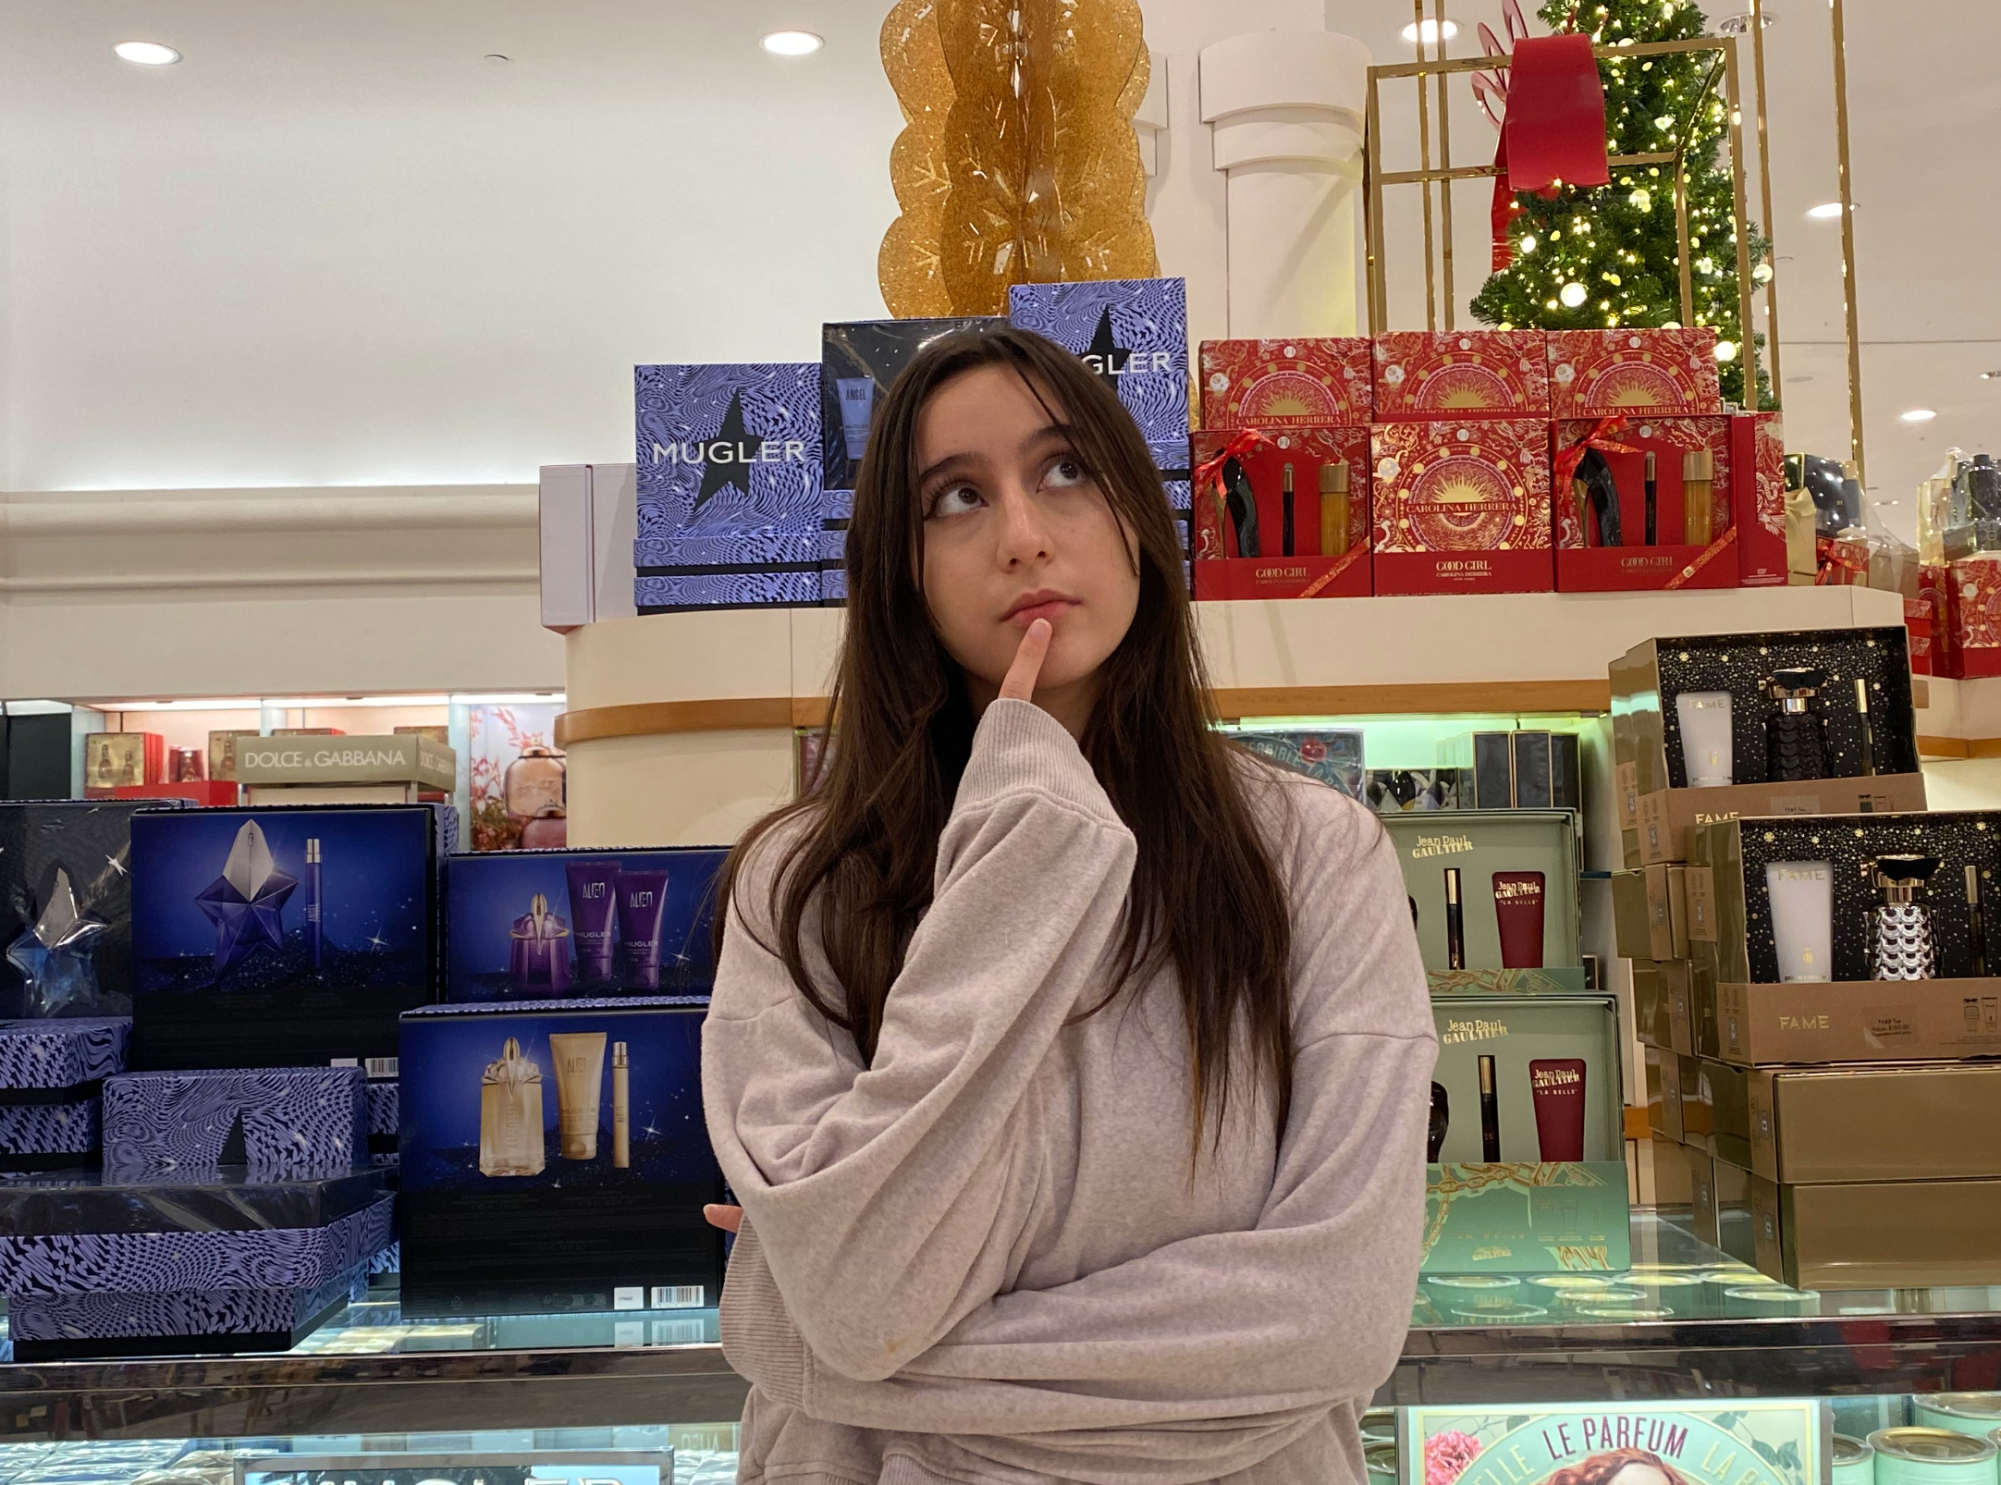 Ceylin Golcu stands in front of a gift set display stand, wondering which one to pick. The display includes high-end brands like Mugler, with the perfume costing around $100.